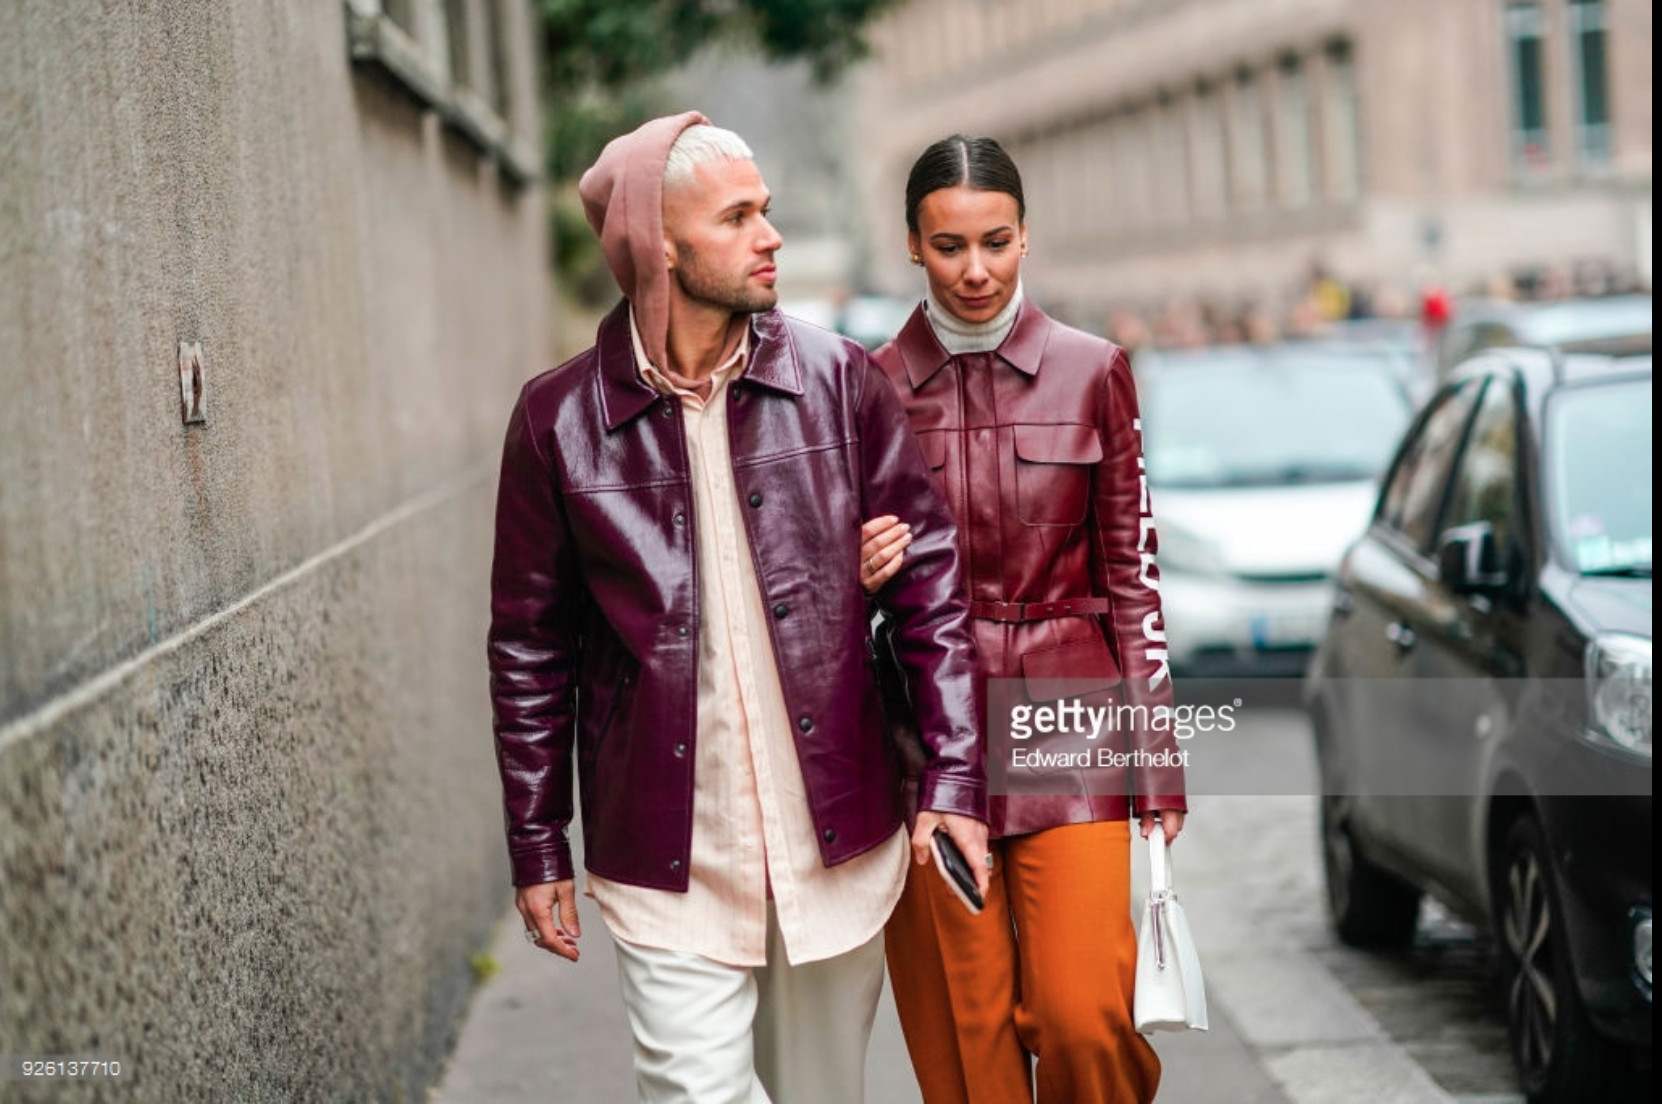 getty images street style